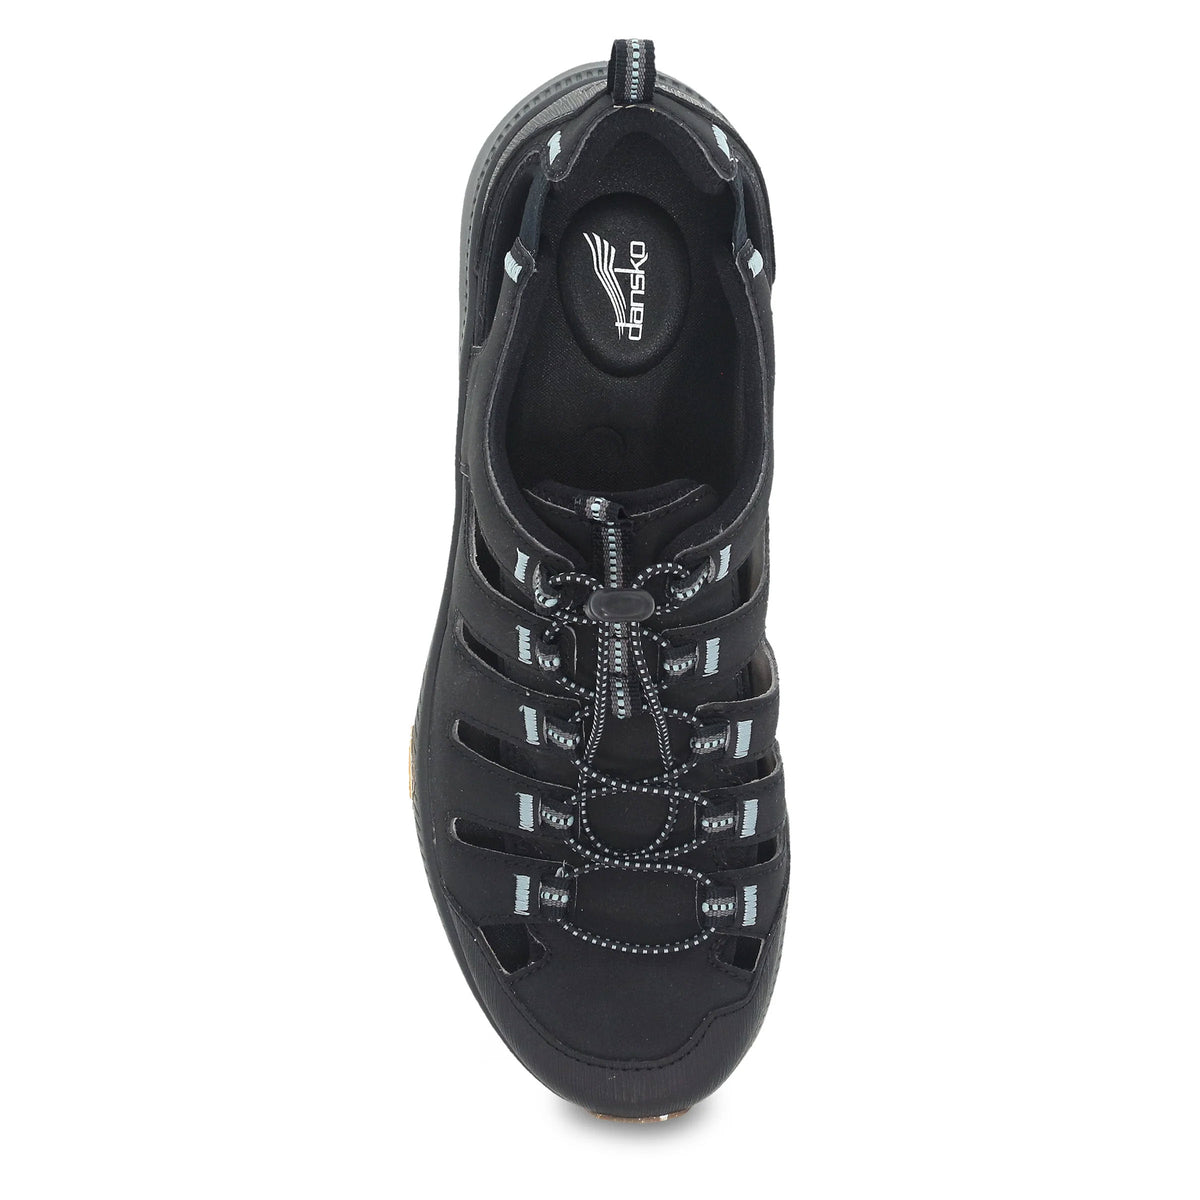 Top view of a Dansko Mia Black hiking shoe with laces and a visible logo on the insole, featuring a Vibram ECOSTEP EVO rubber outsole.